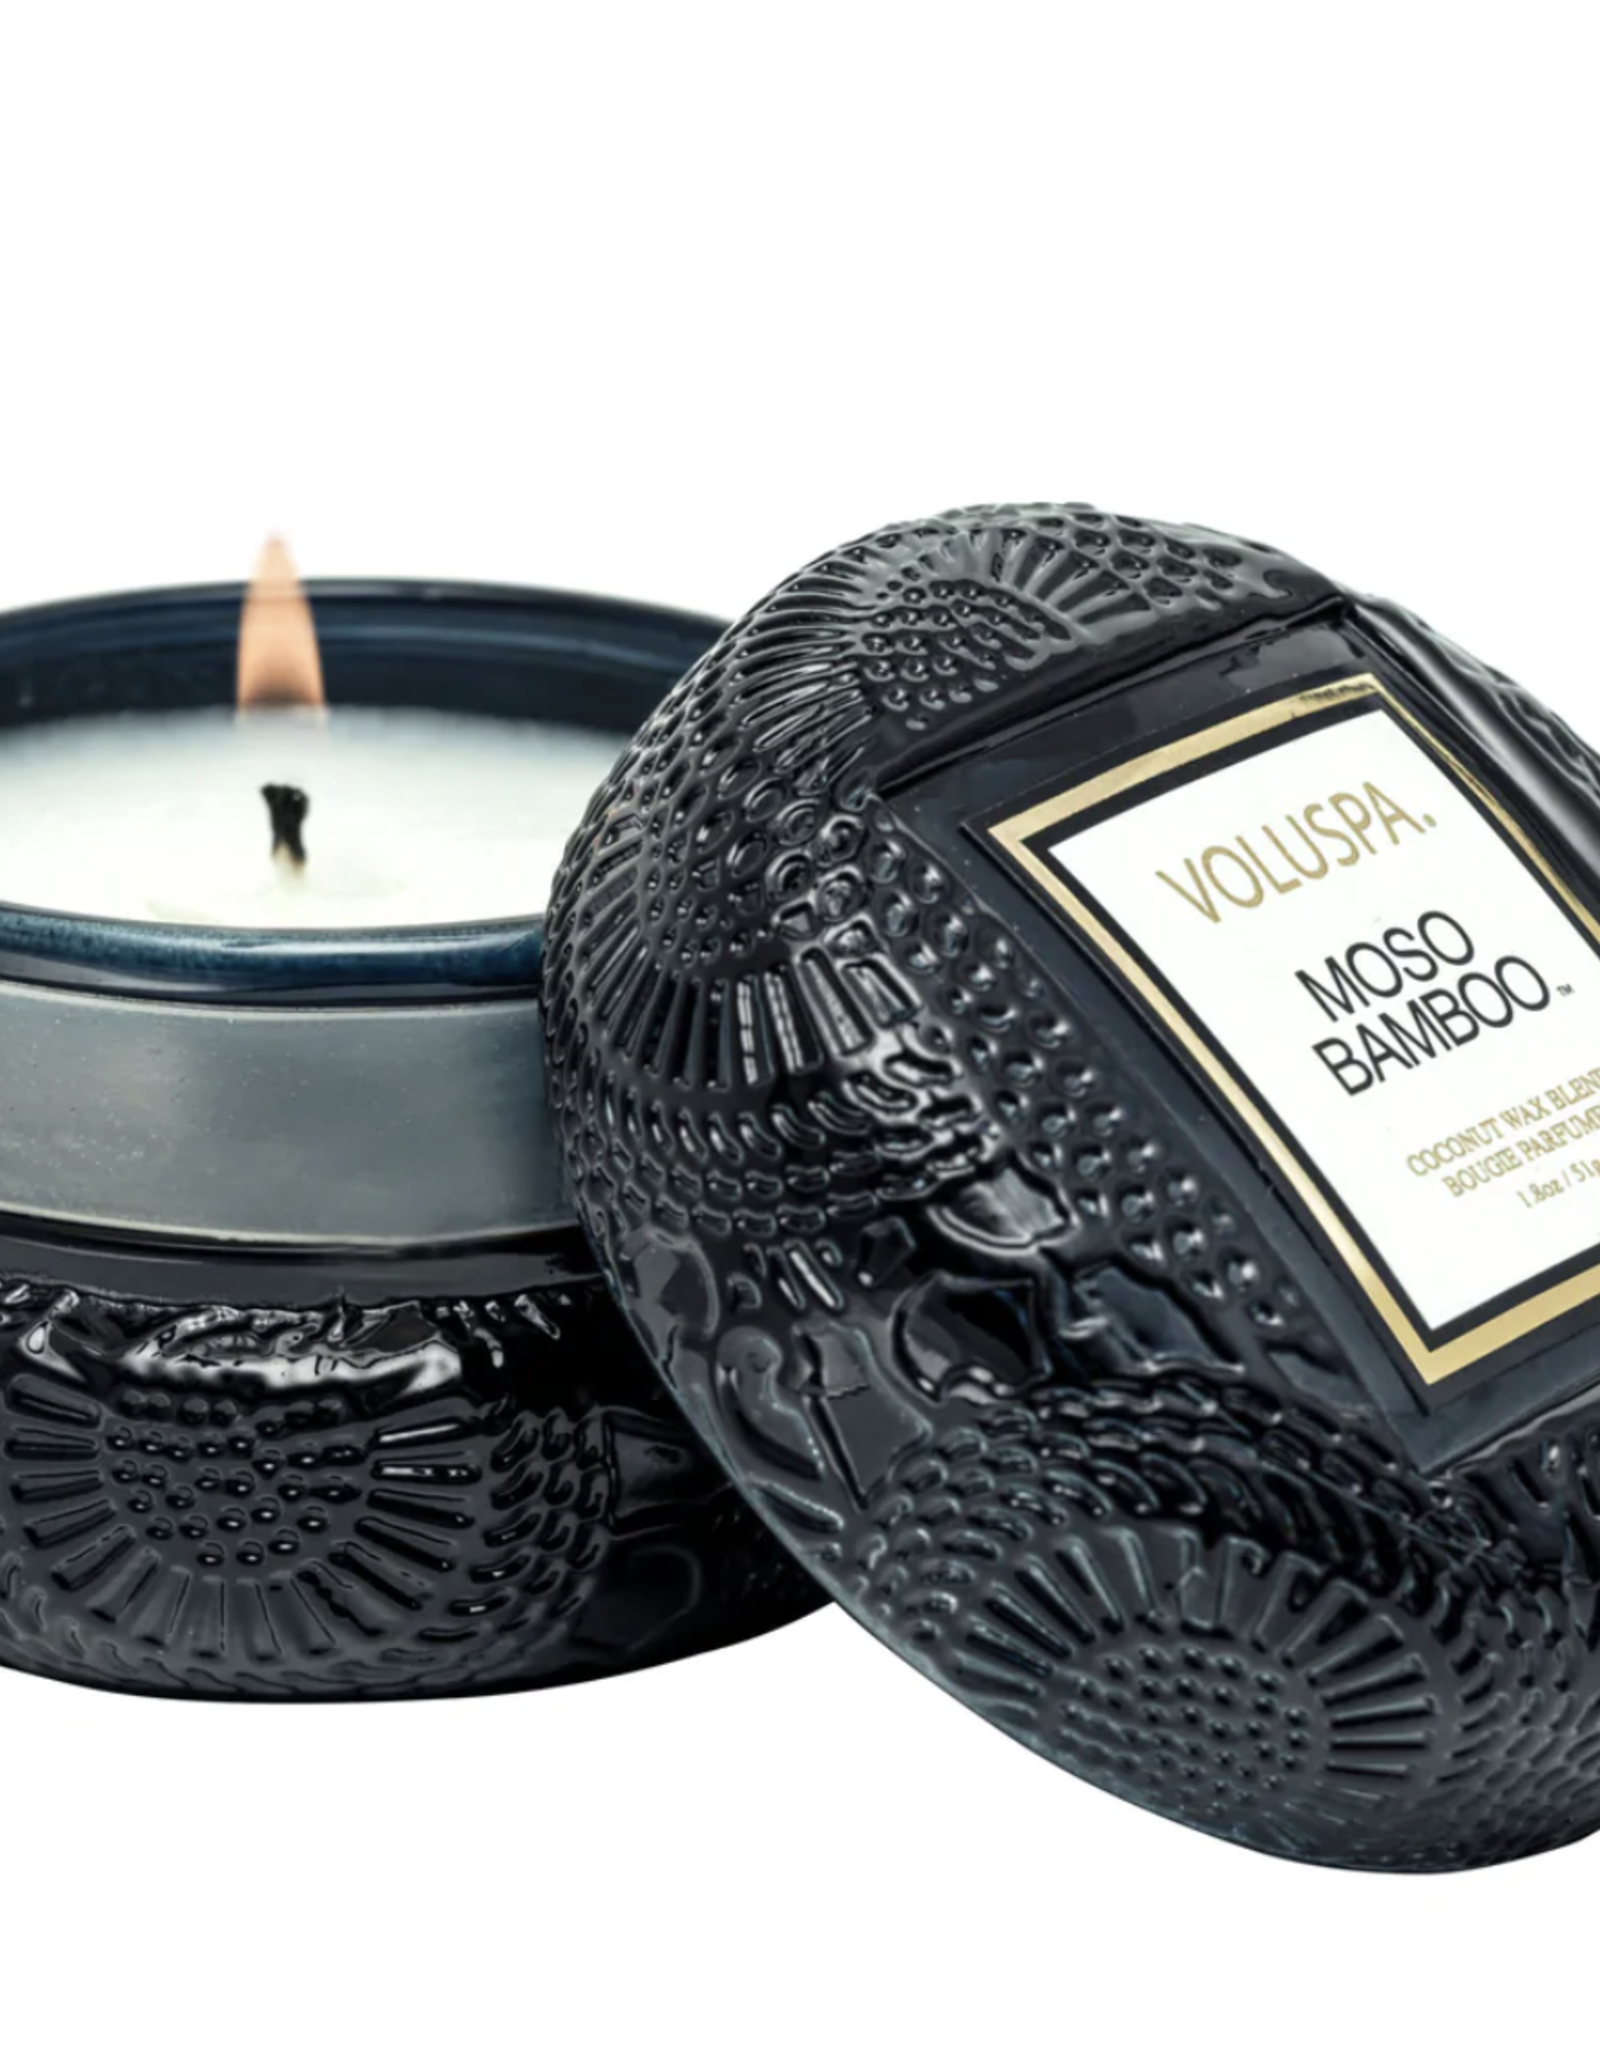 Moso Bamboo Macarcon Candle